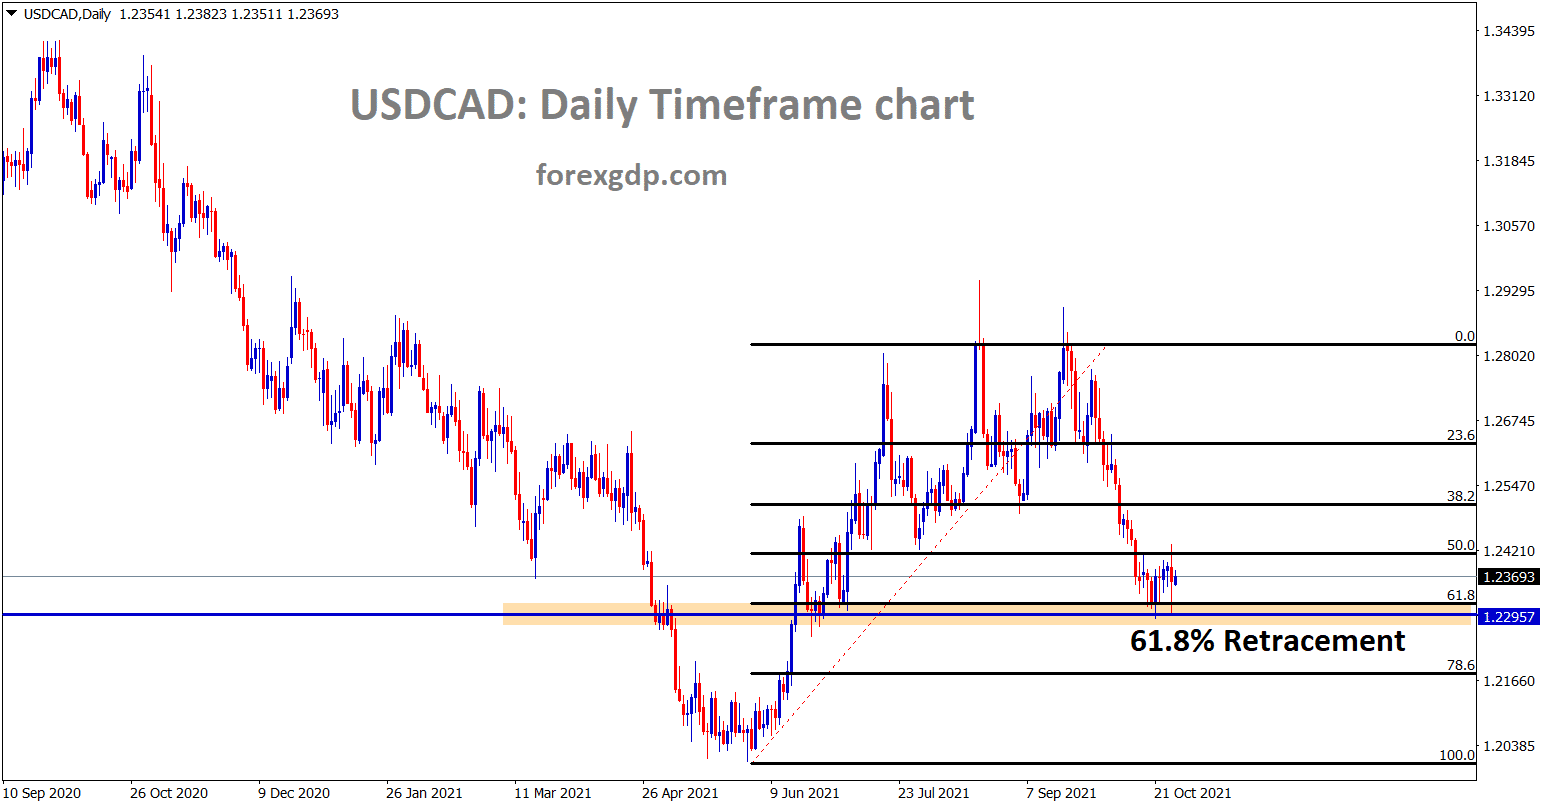 USDCAD has reached the 61.8 retracement area Recently market rebounded twice after hitting the 61 retracement level.